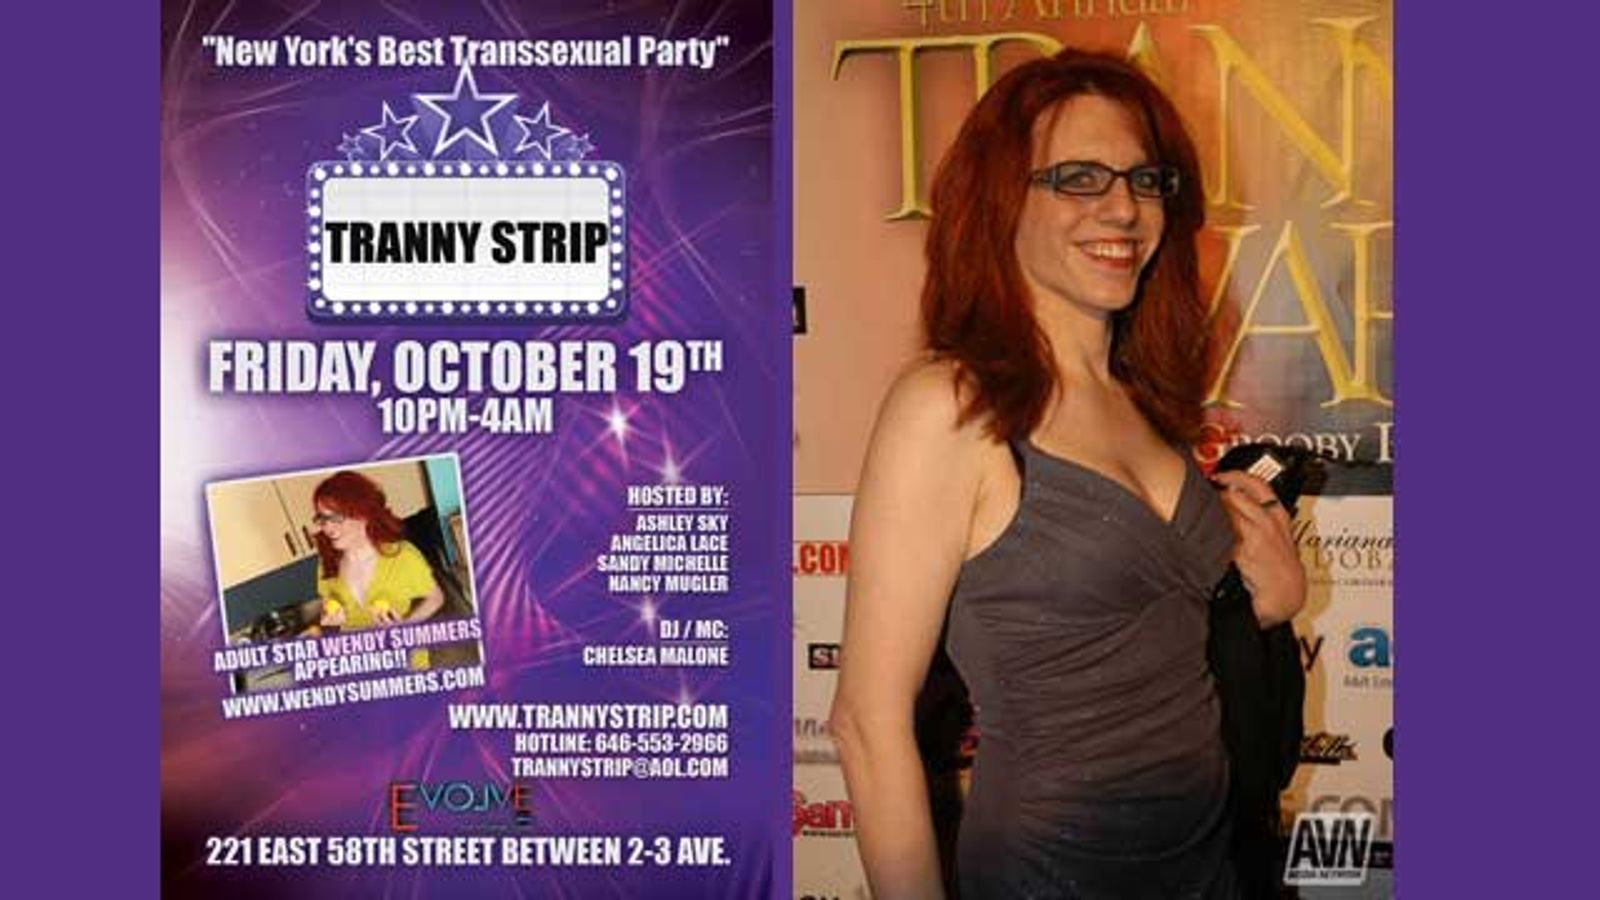 Wendy Summers to Host NYC Tranny Strip This Friday